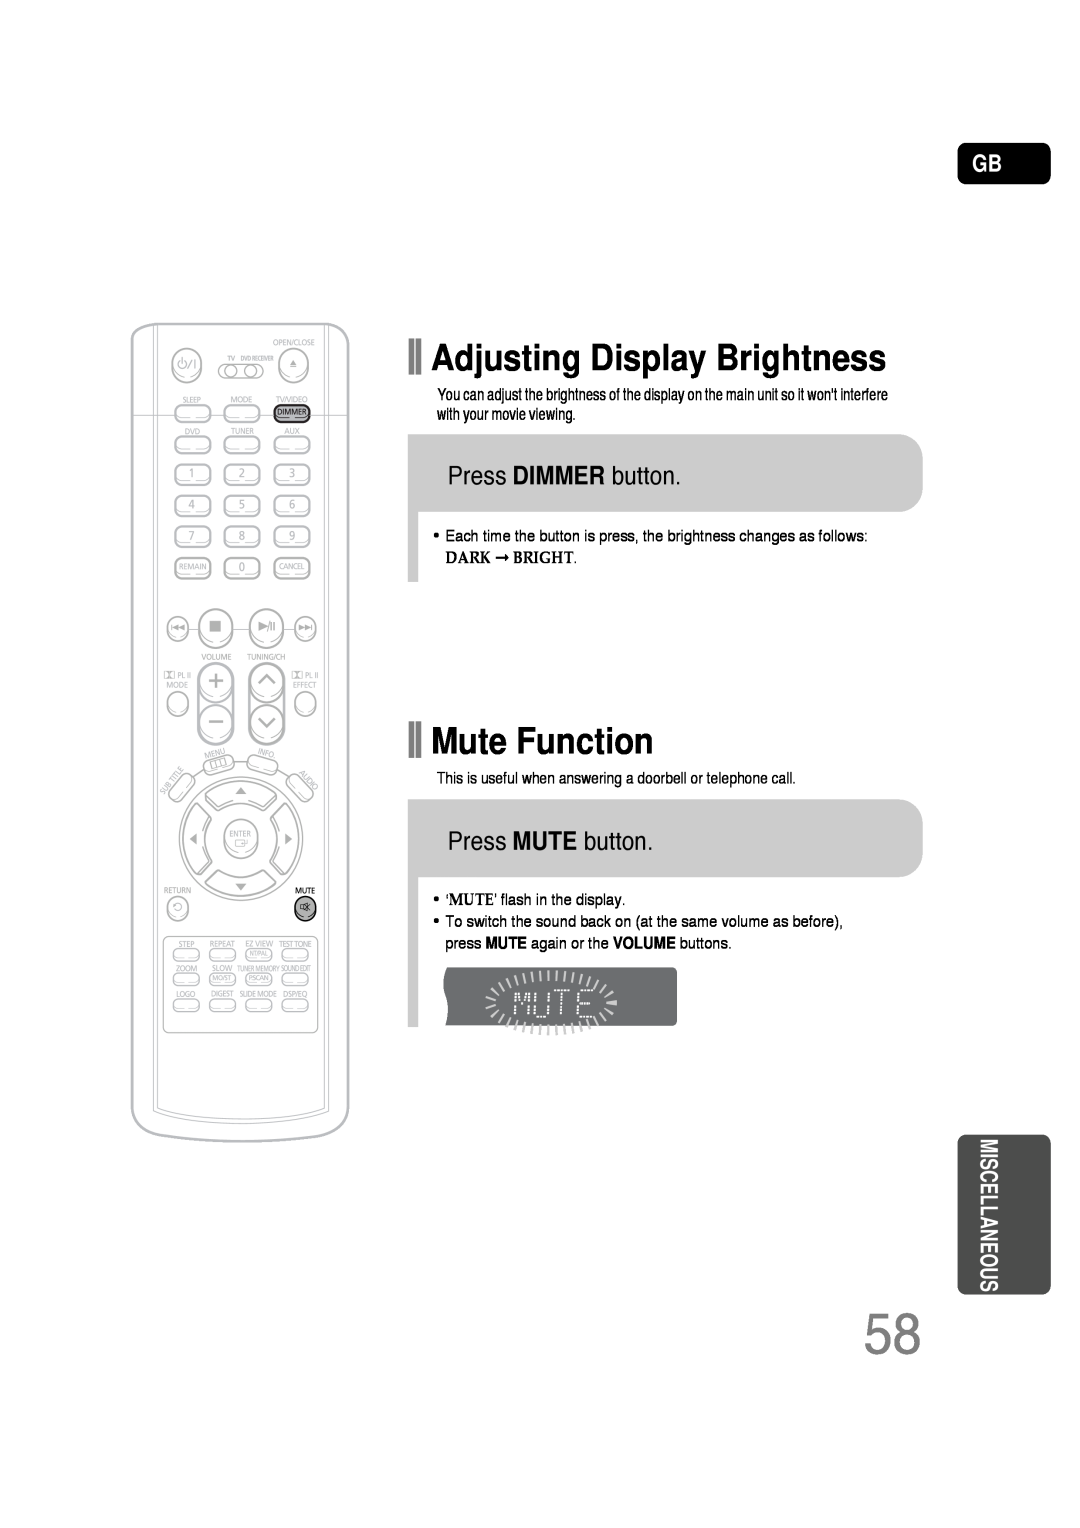 Samsung HT-P30 Adjusting Display Brightness, Mute Function, Press DIMMER button, Press MUTE button, Miscellaneous 